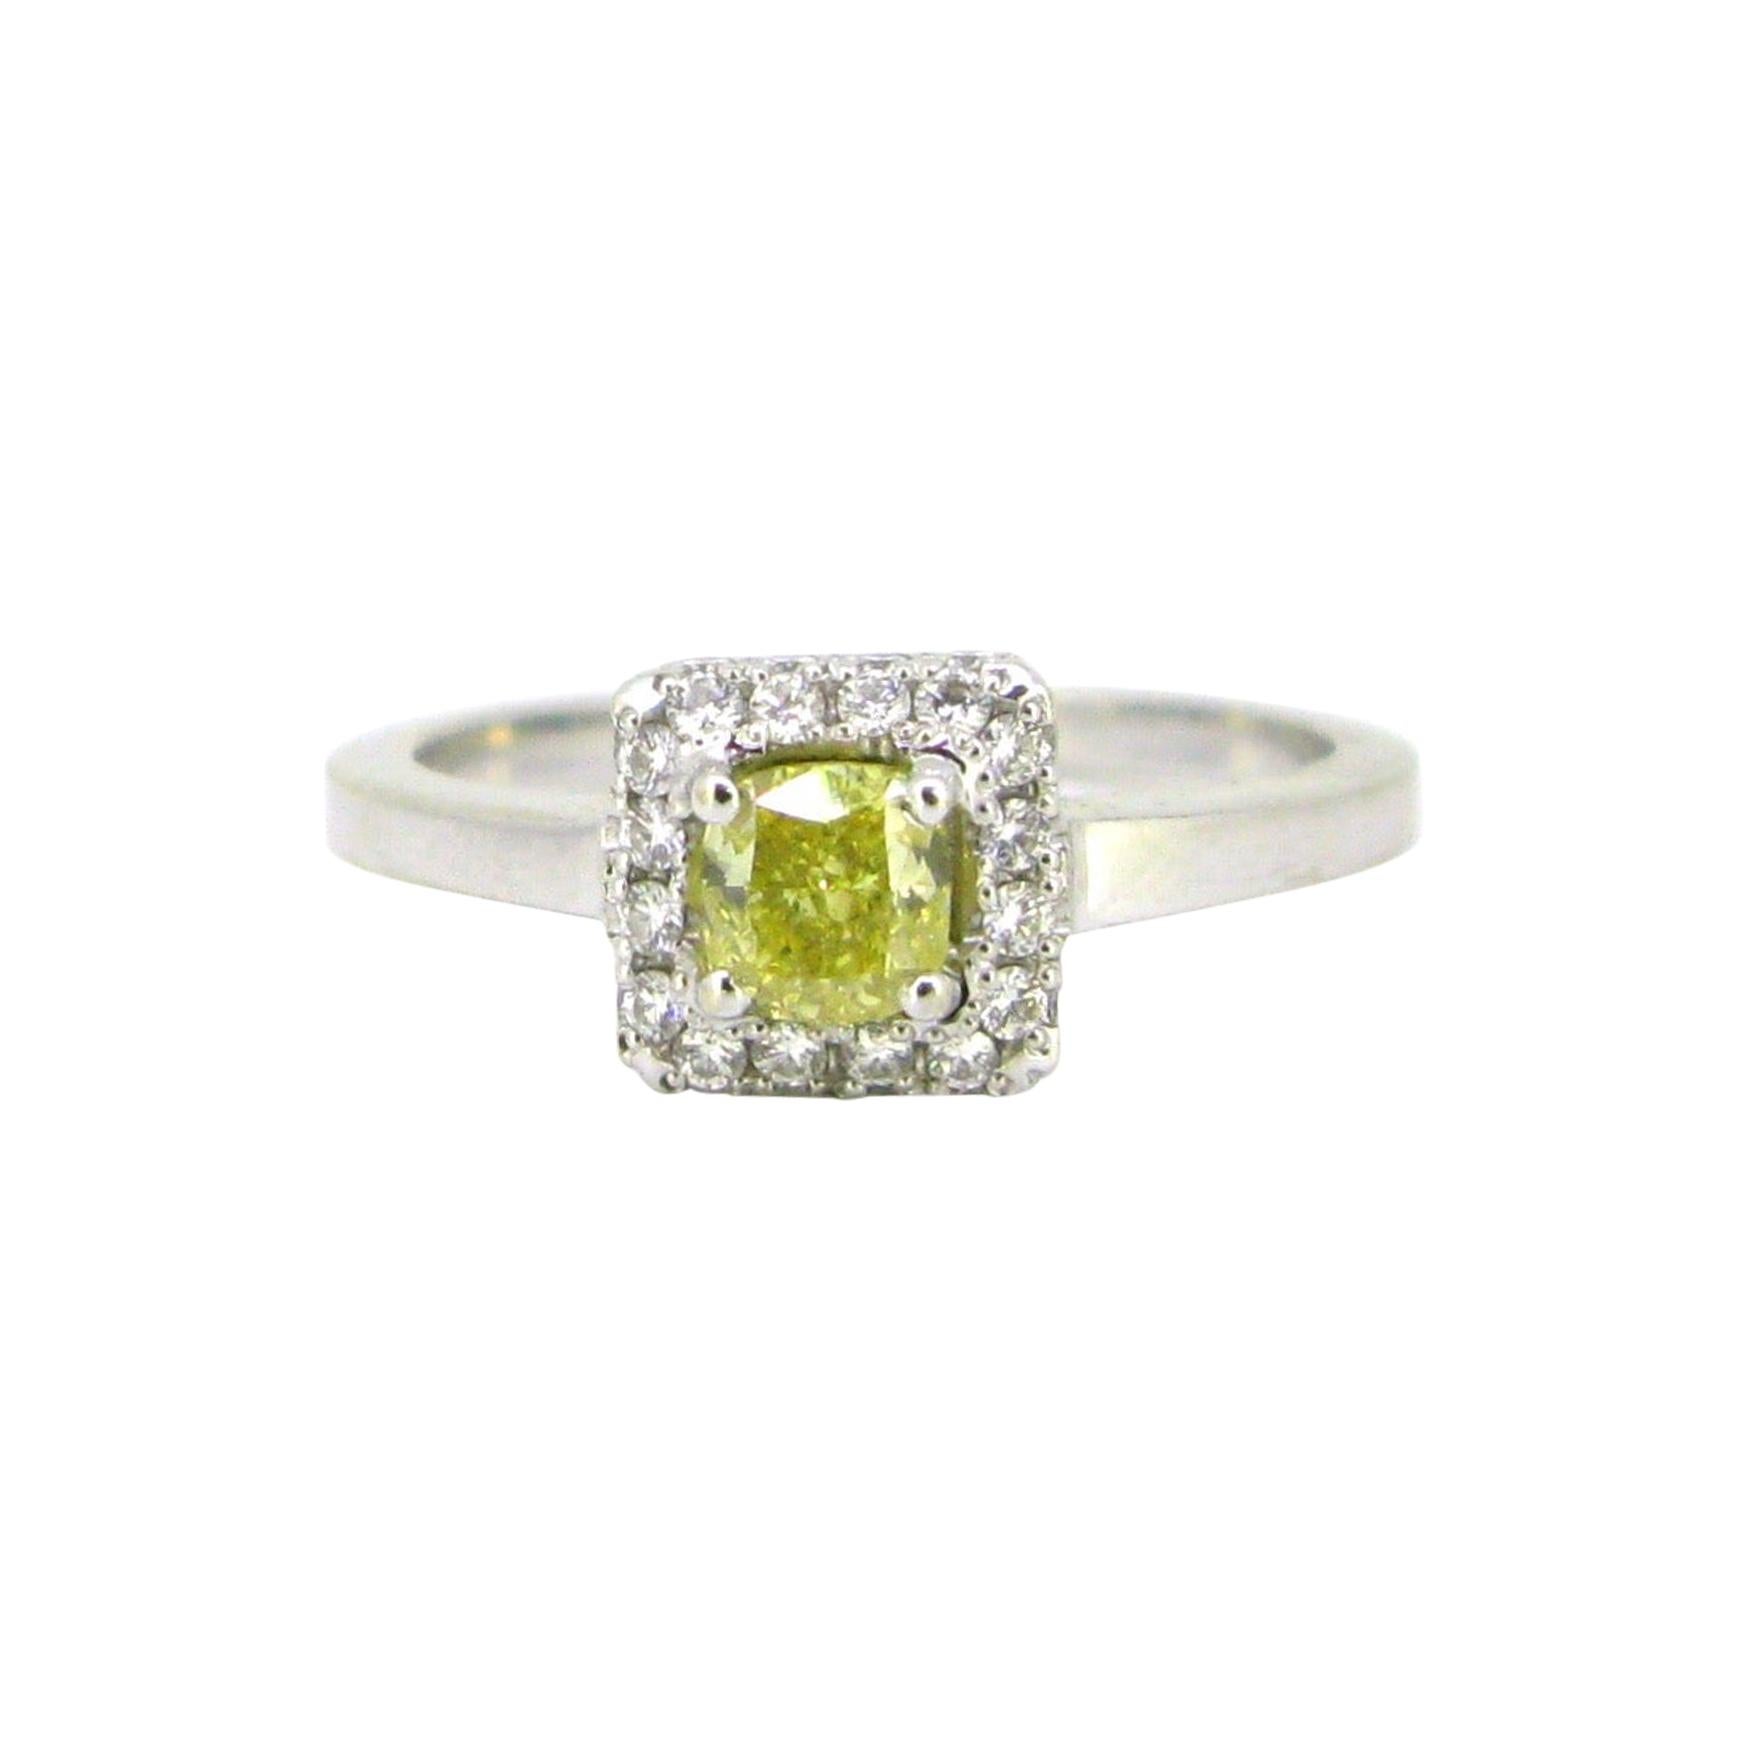 0.50 Carat Fancy Intense Yellow Diamond Cluster Wedding Engagement Ring For Sale